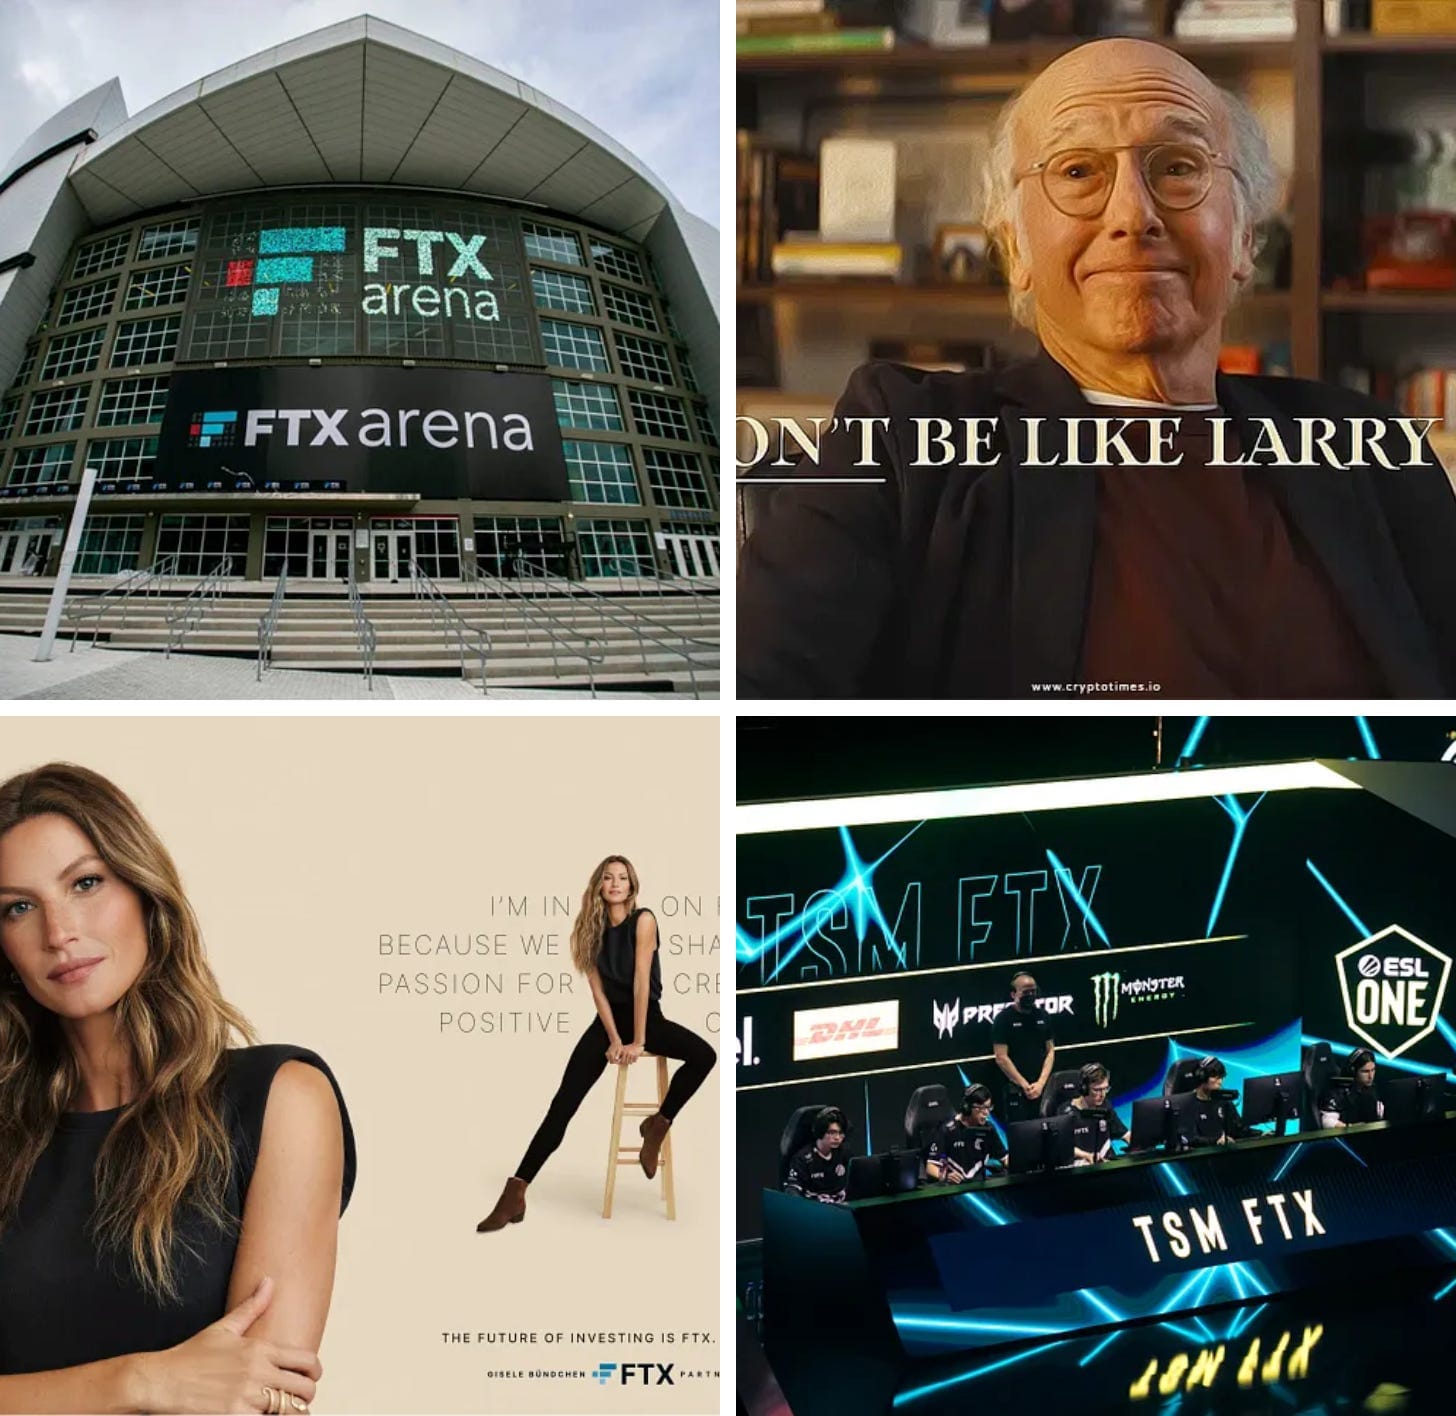 A photo of the FTX Arena in Miami, a still frame from a commercial starring Larry David, a print ad with Gisele Bundchen, and a photograph of the FTX TSM esports team